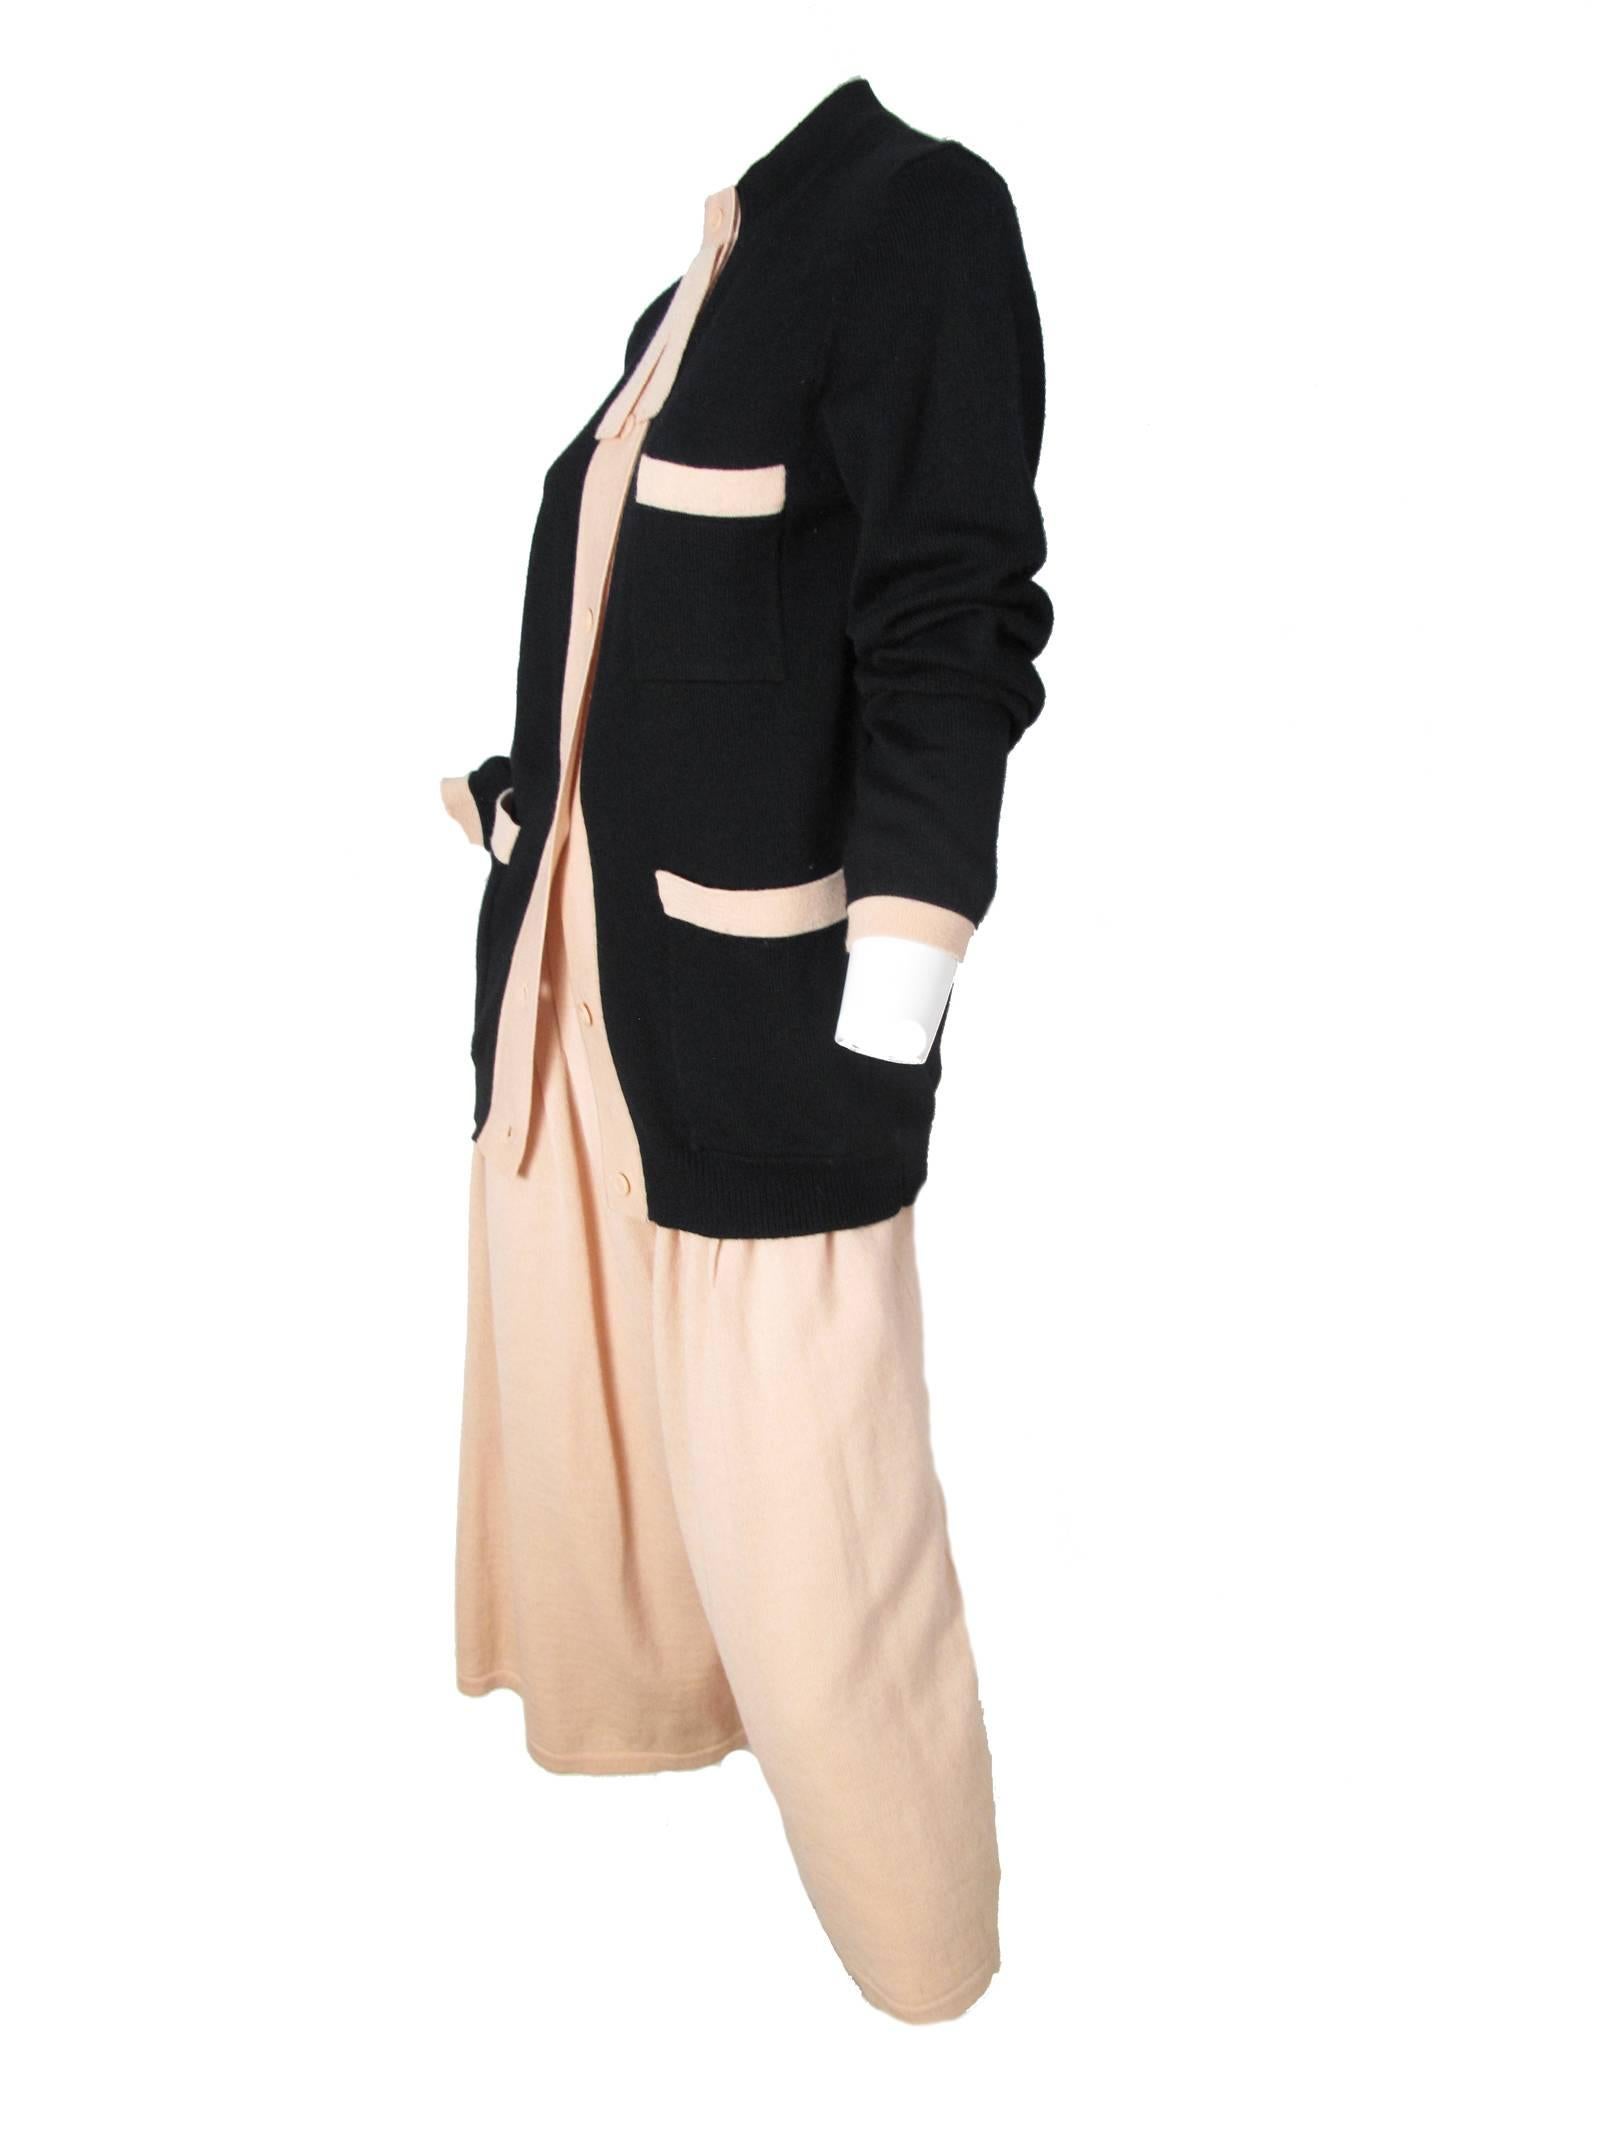 1980s Sonia Rykiel black wool knit cardigan with pale peach trim and peach culottes.  Three font pockets on cardigan. Pants are lined. Condition: Excellent. 
Size 8

Cardigan: 36